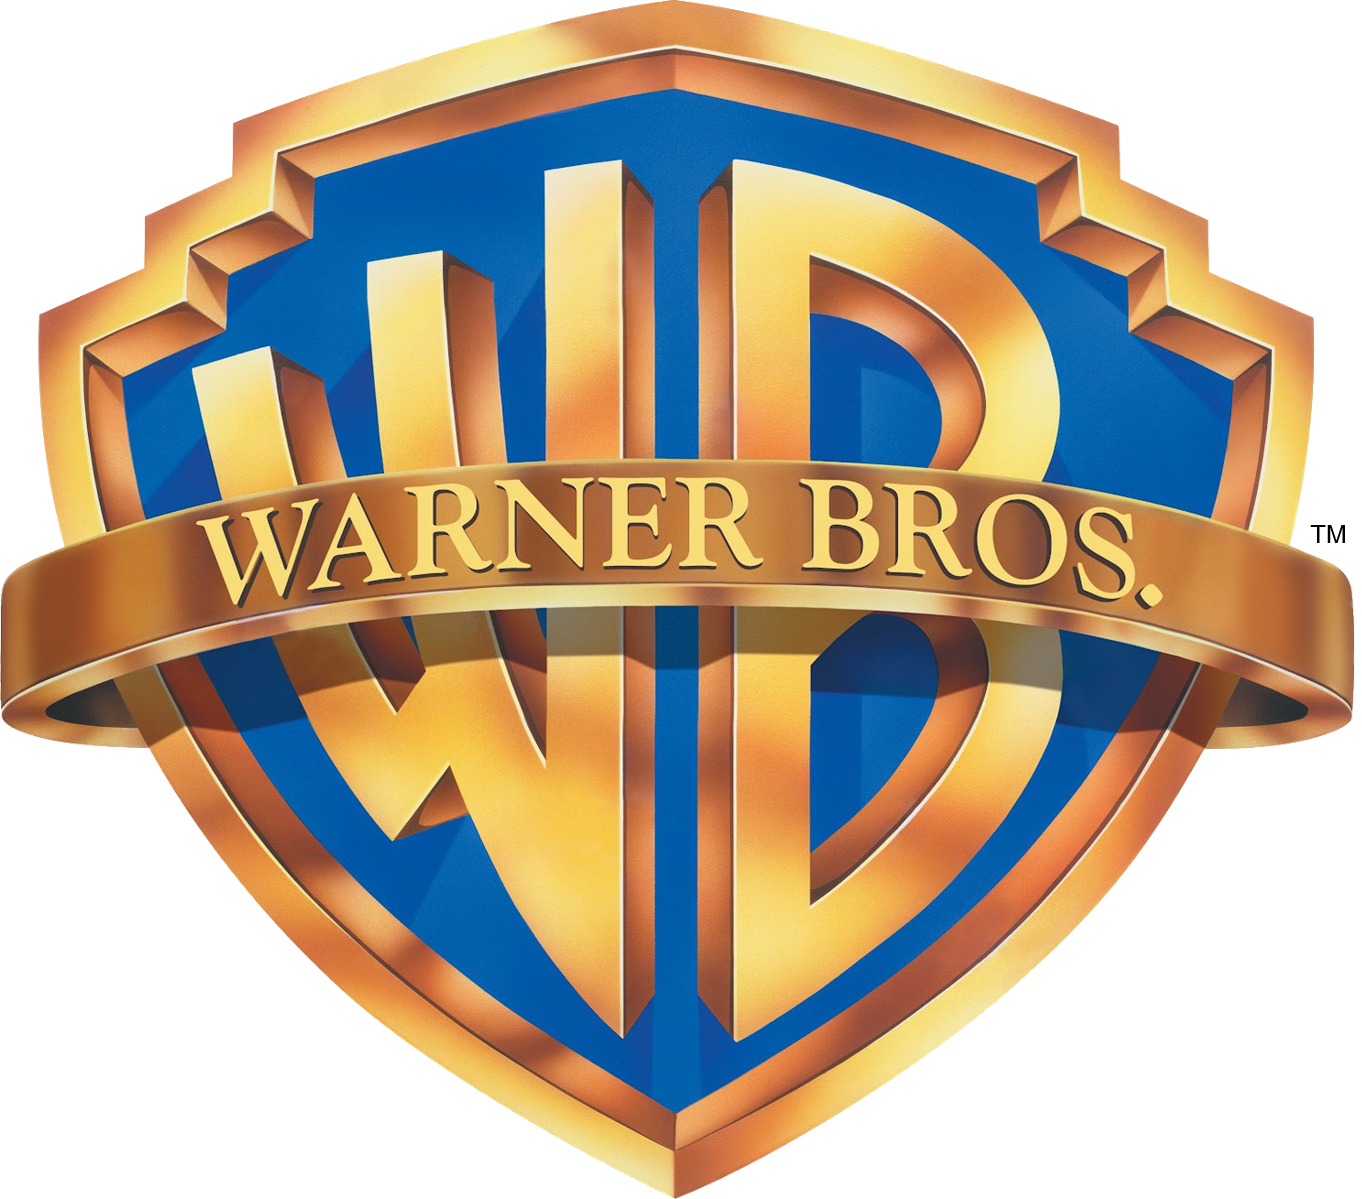 https://static.wikia.nocookie.net/warnerbrosbase/images/5/5d/Warner_Bros._1992_Shield.png/revision/latest?cb=20190110015825